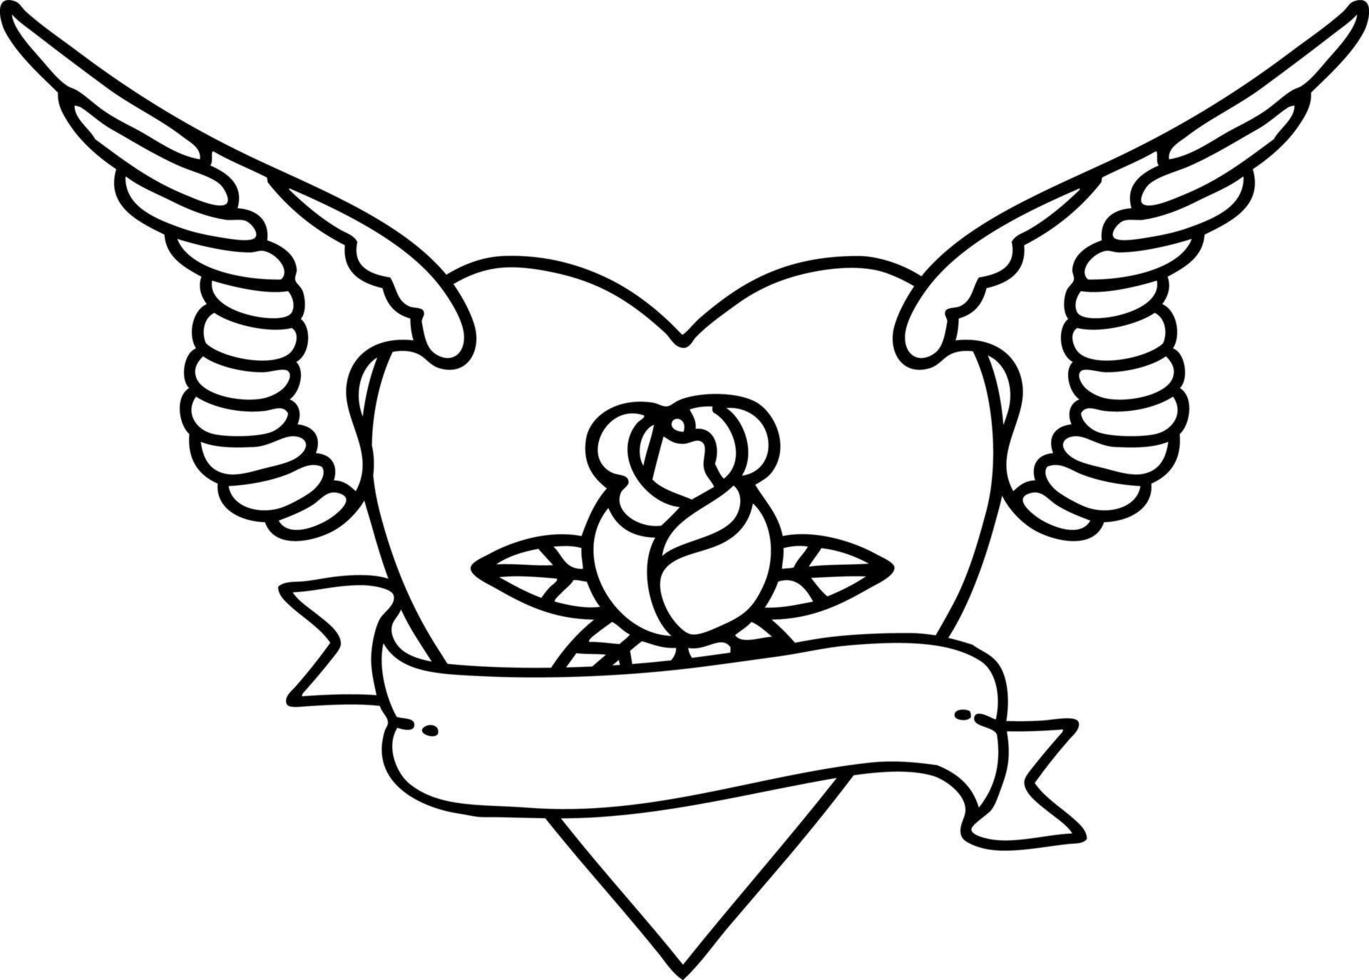 tattoo in black line style of heart with wings a rose and banner vector